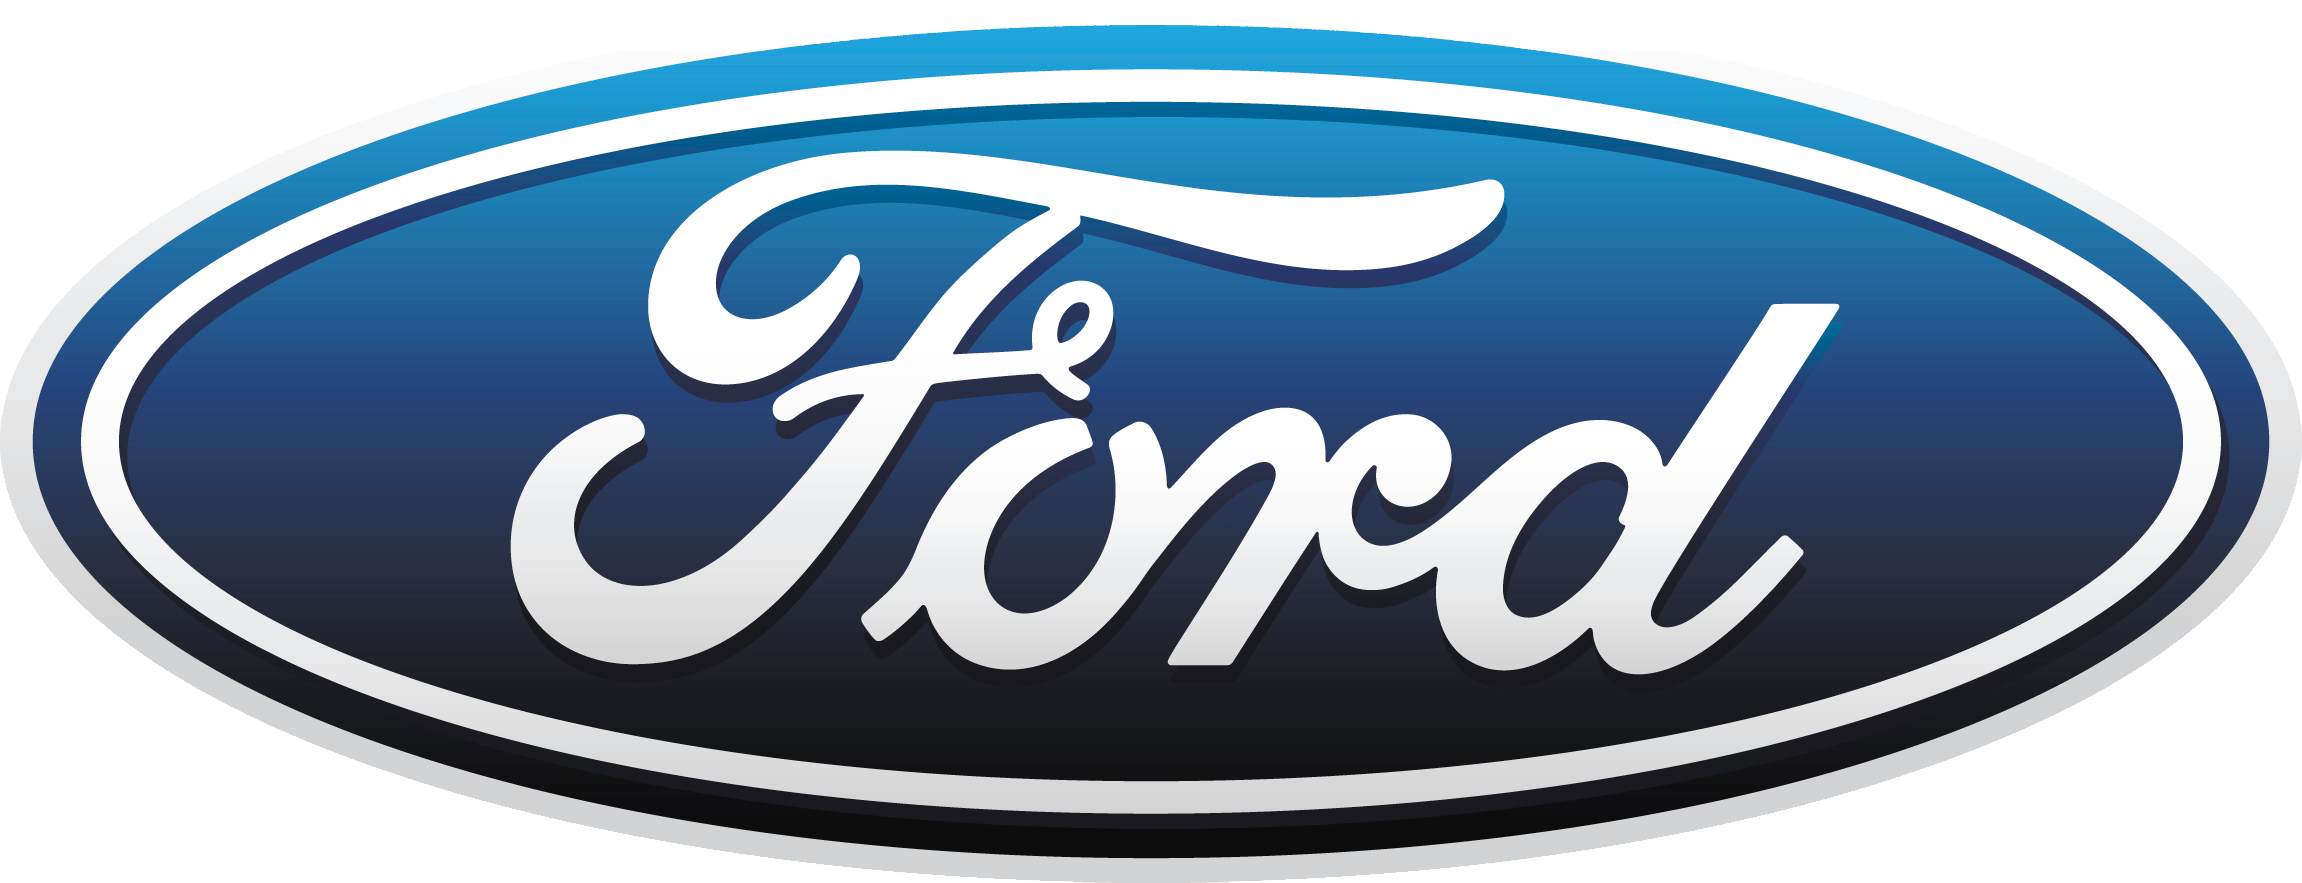 Ford logo PNG image